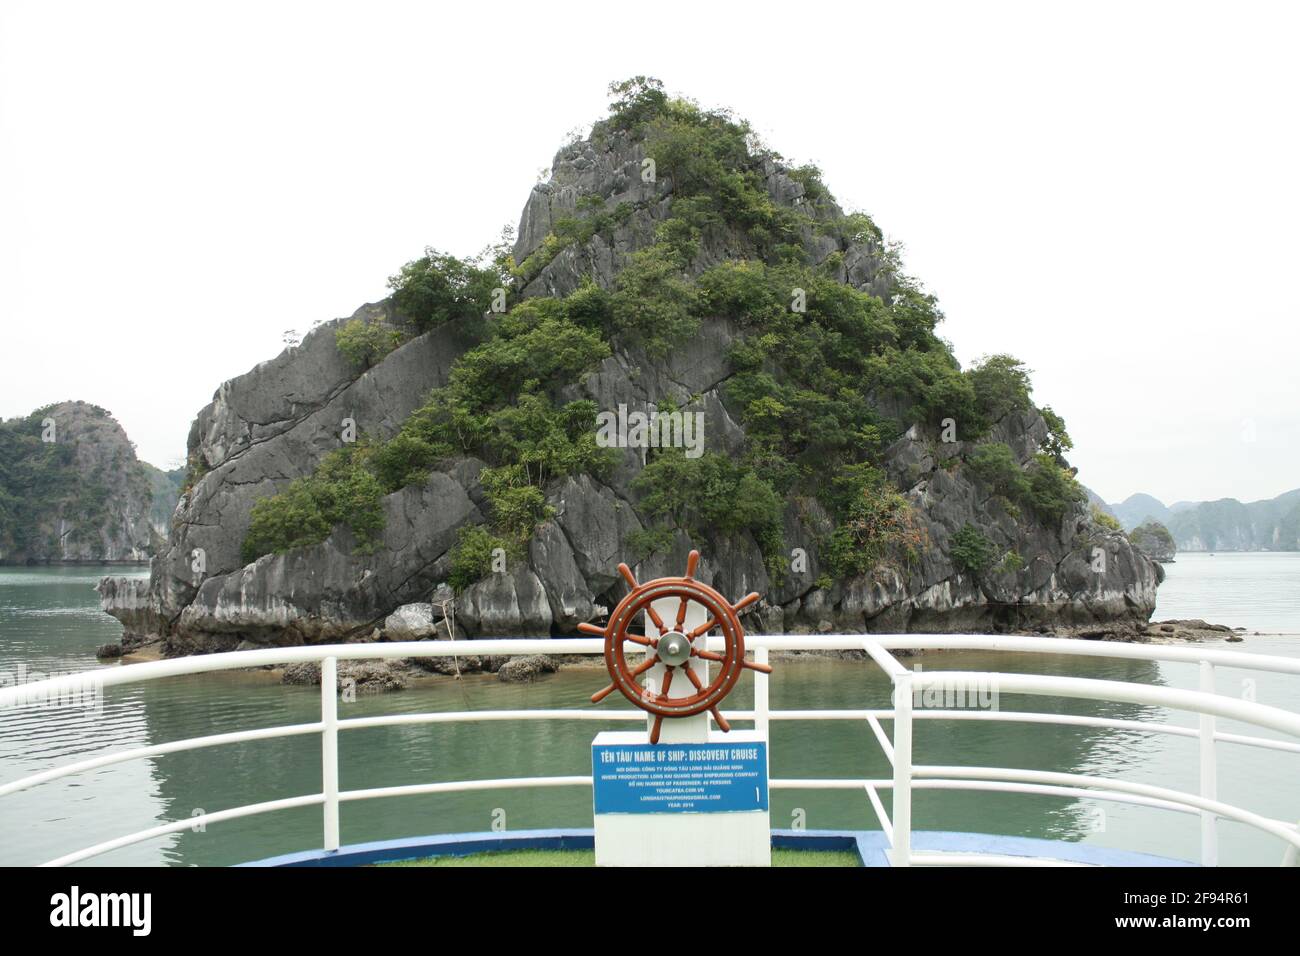 Photographs of ships in Halong Bay, Vietnam  from different perspectives, taken during daytime in misty weather on 06/01/20. Stock Photo